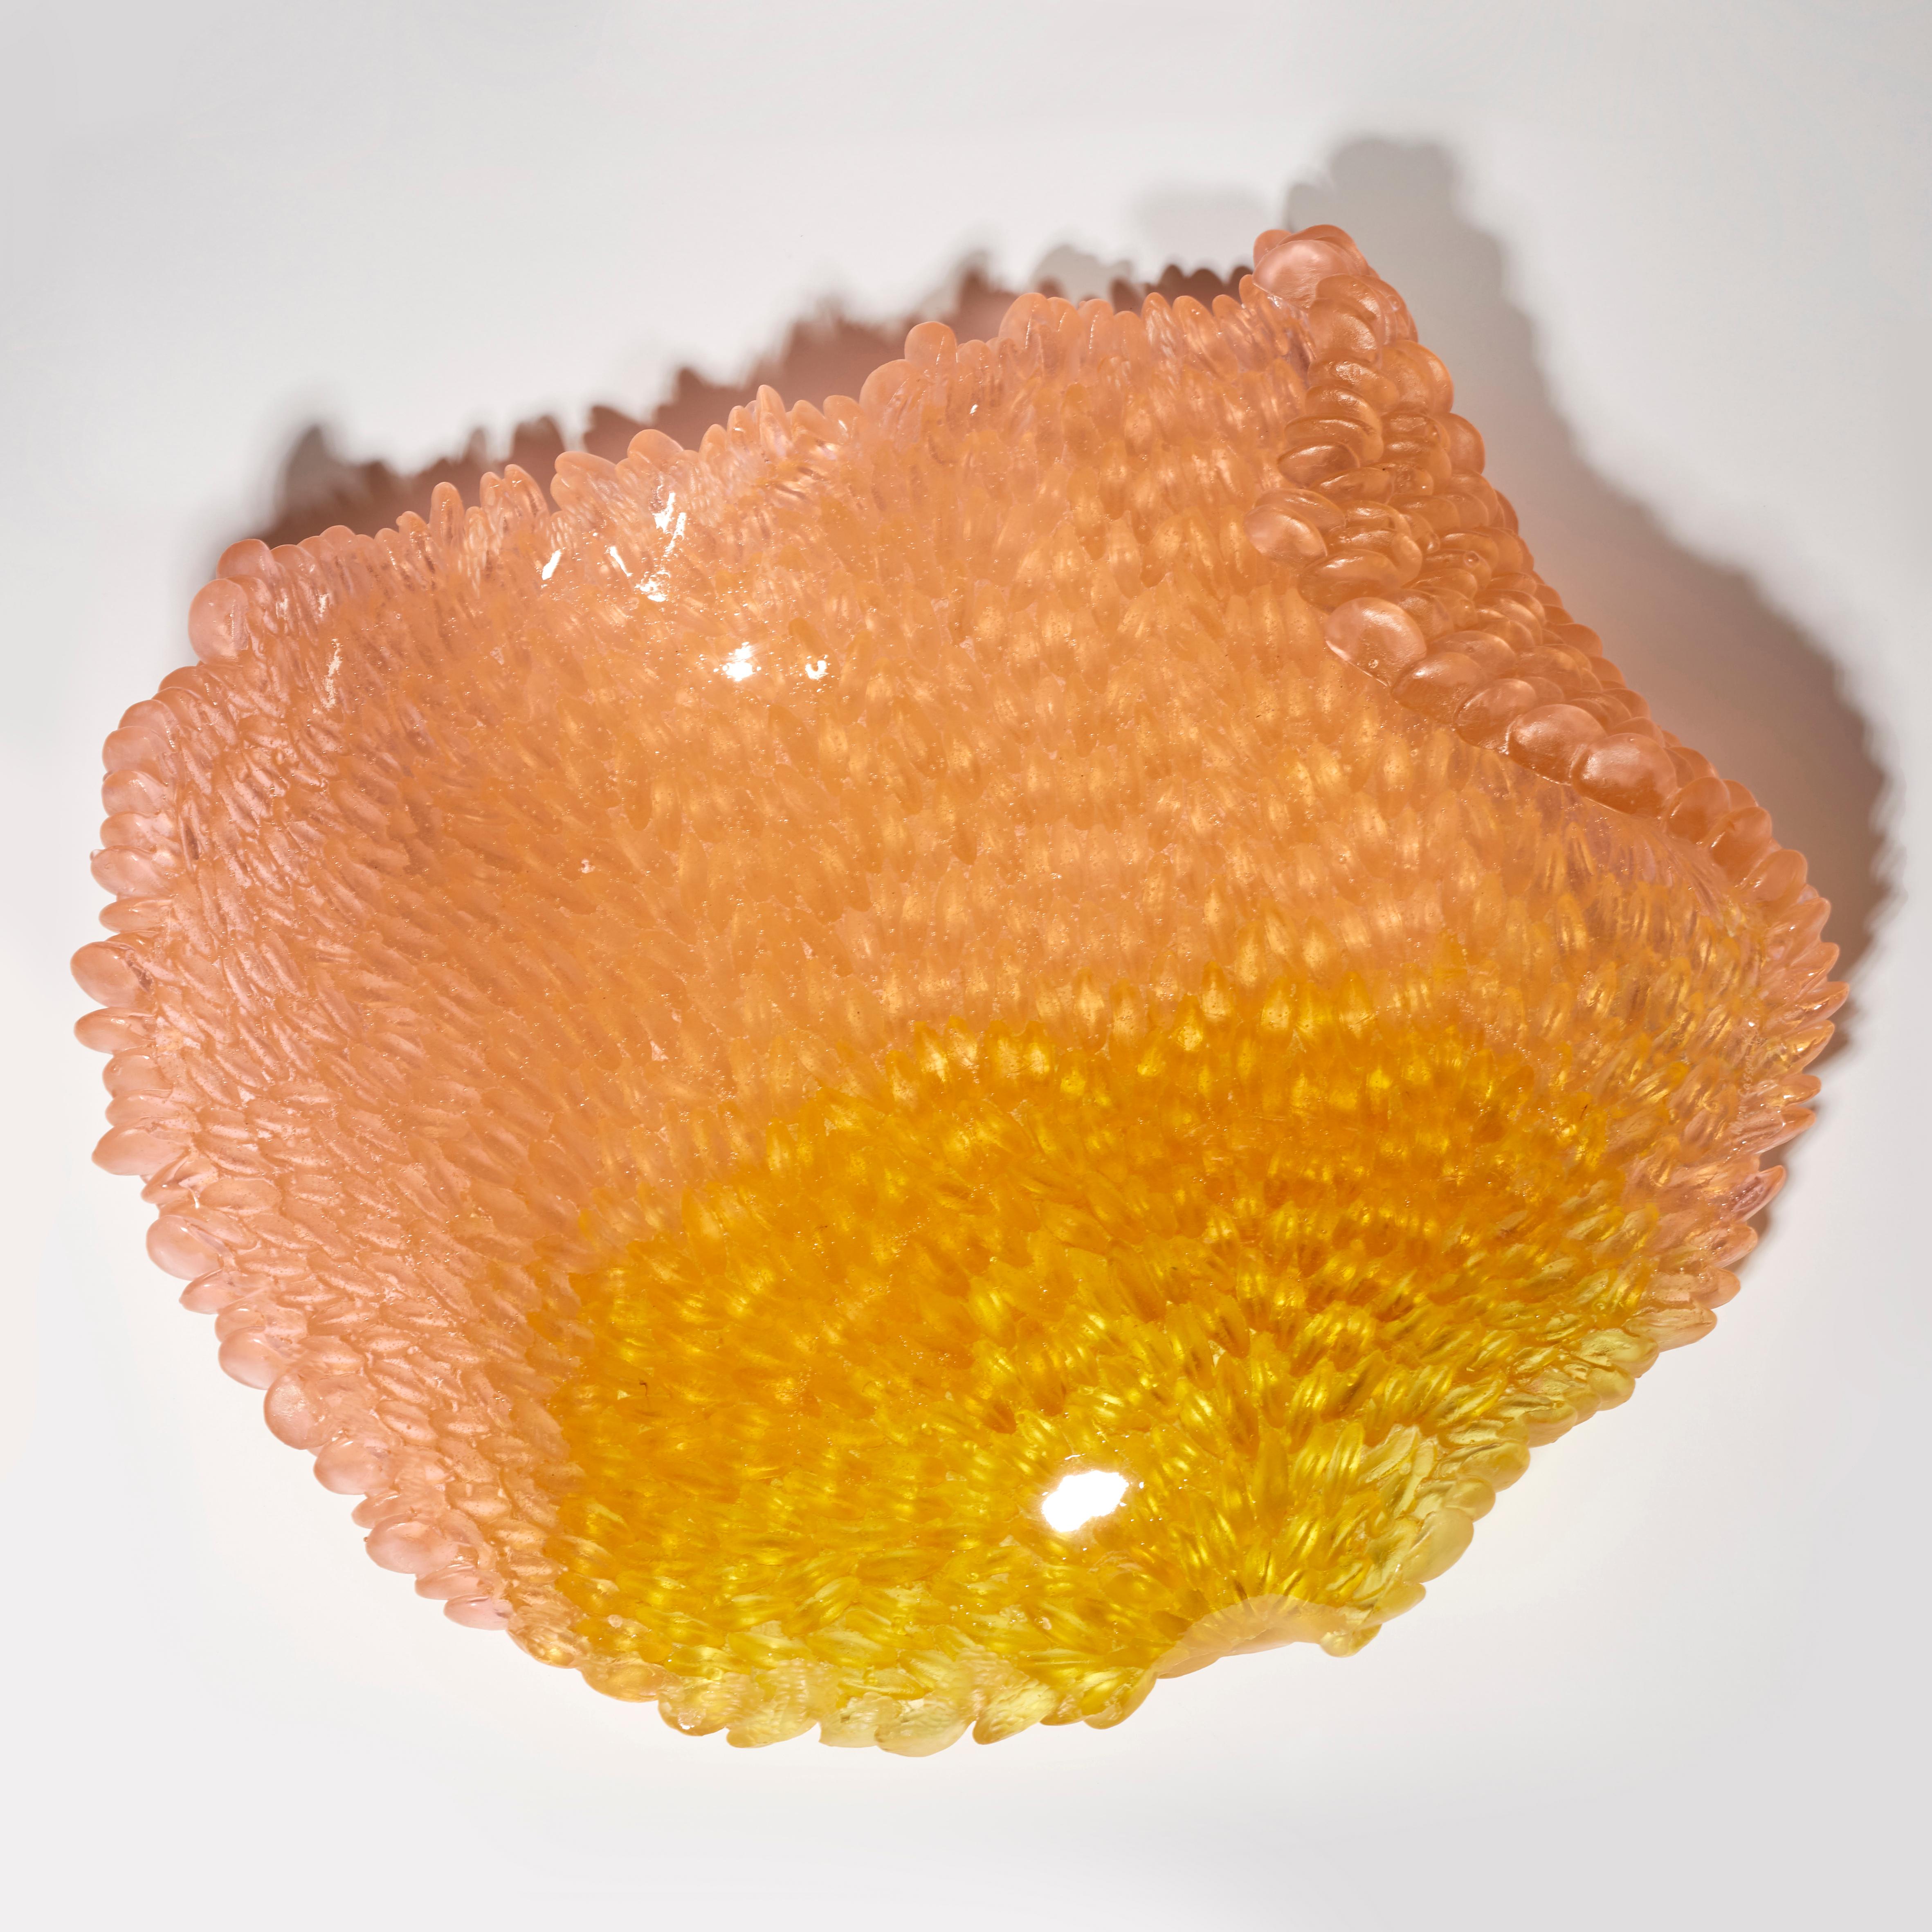 British Orange Rose, a Glass Sculpture in Amber, Gold and Peach by Nina Casson McGarva